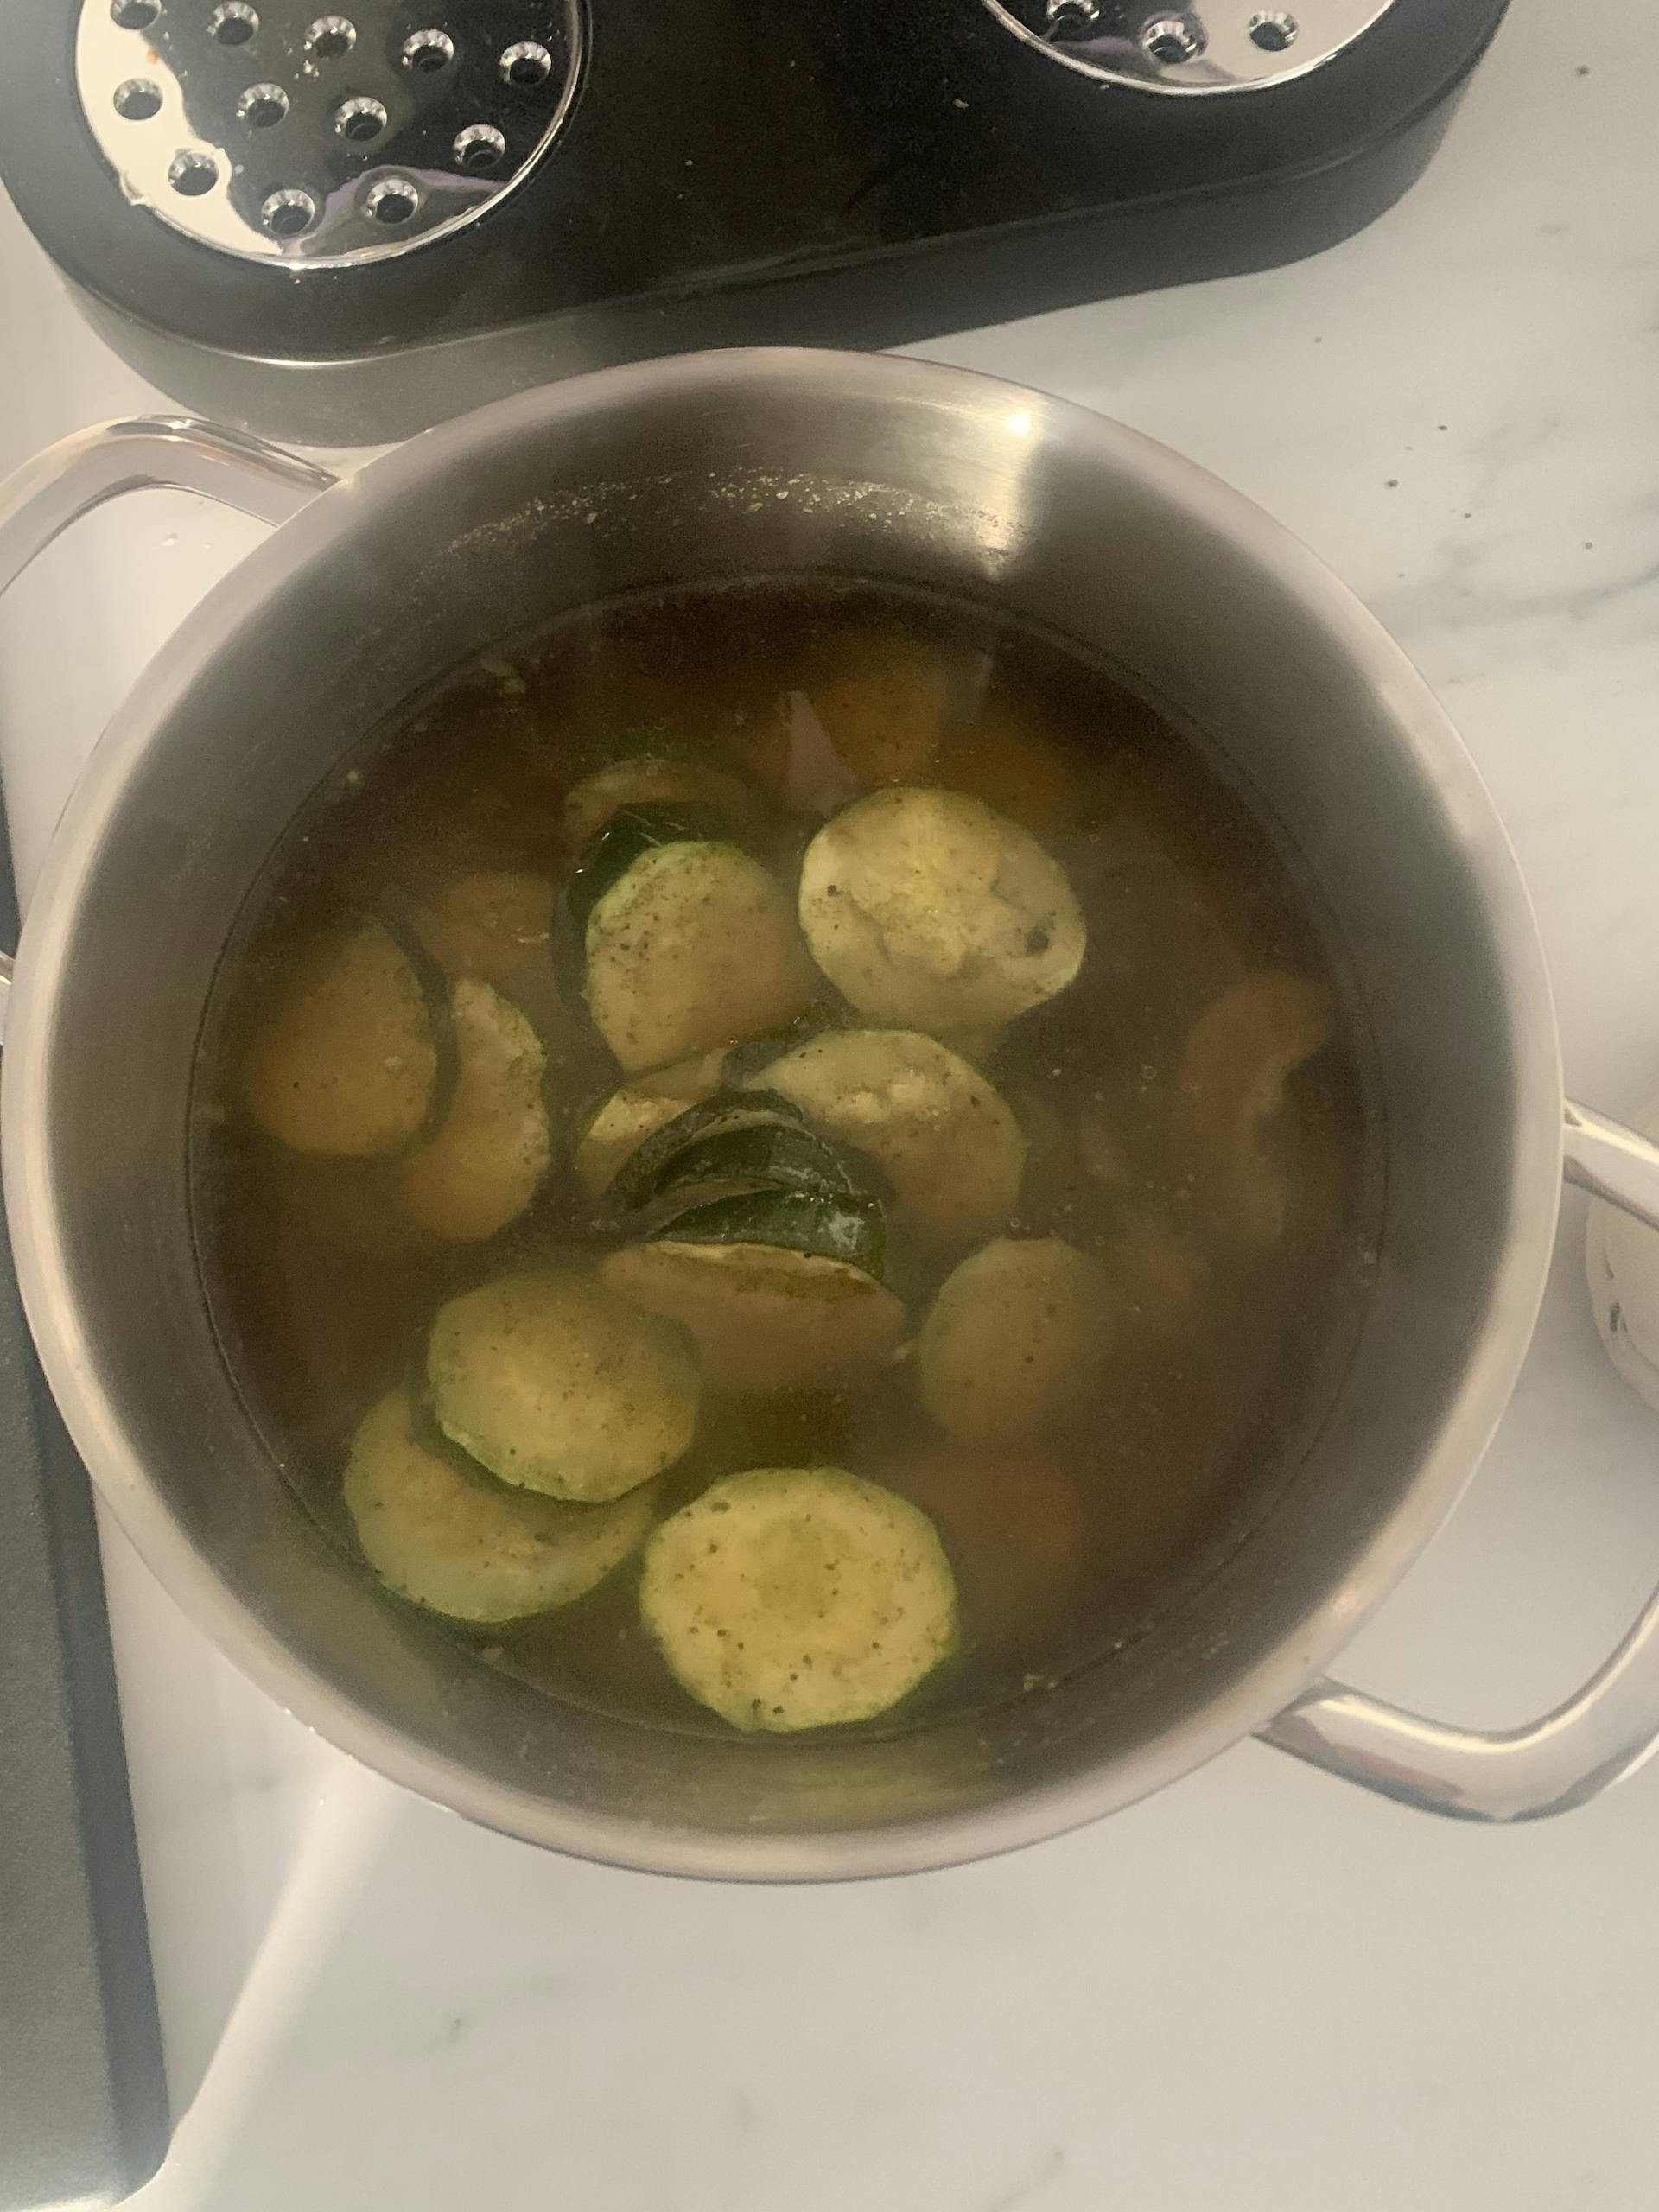 Image of step 3 called: Courgette uit de oven 